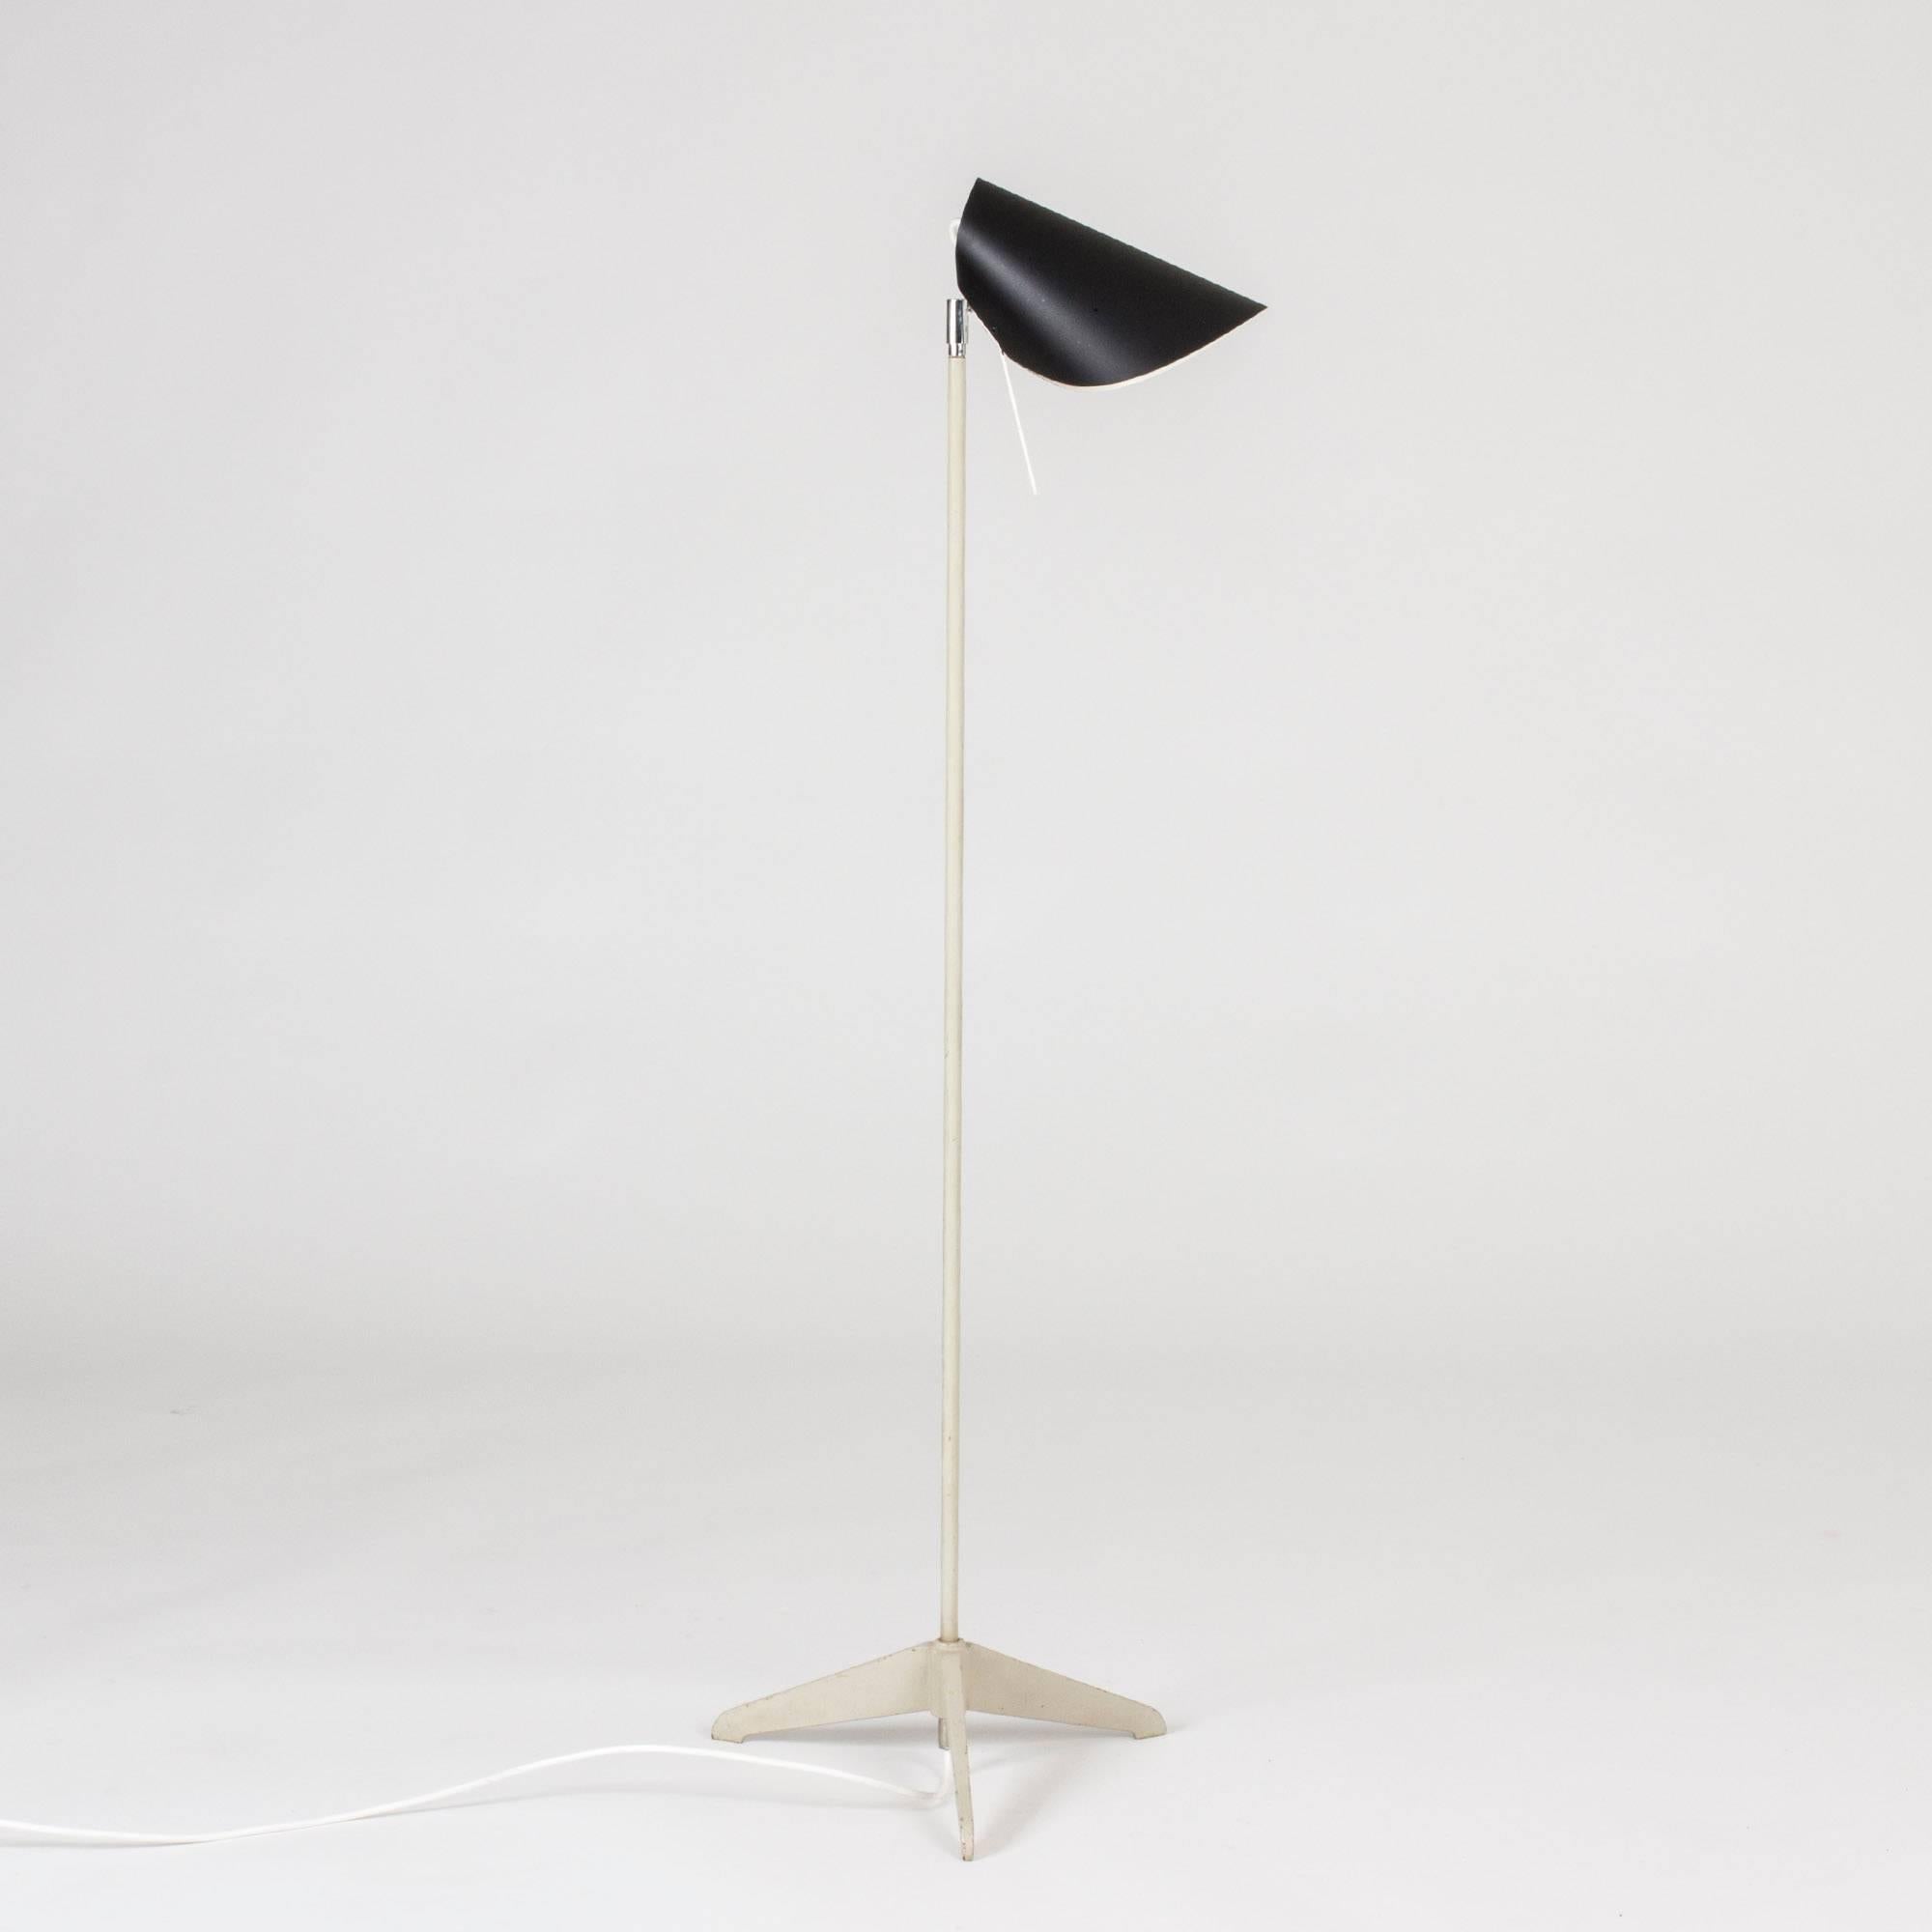 Cool metal floor lamp by Hans-Agne Jakobsson with a pale grey lacquered base in an industrial design. Shade lacquered black, white inside.